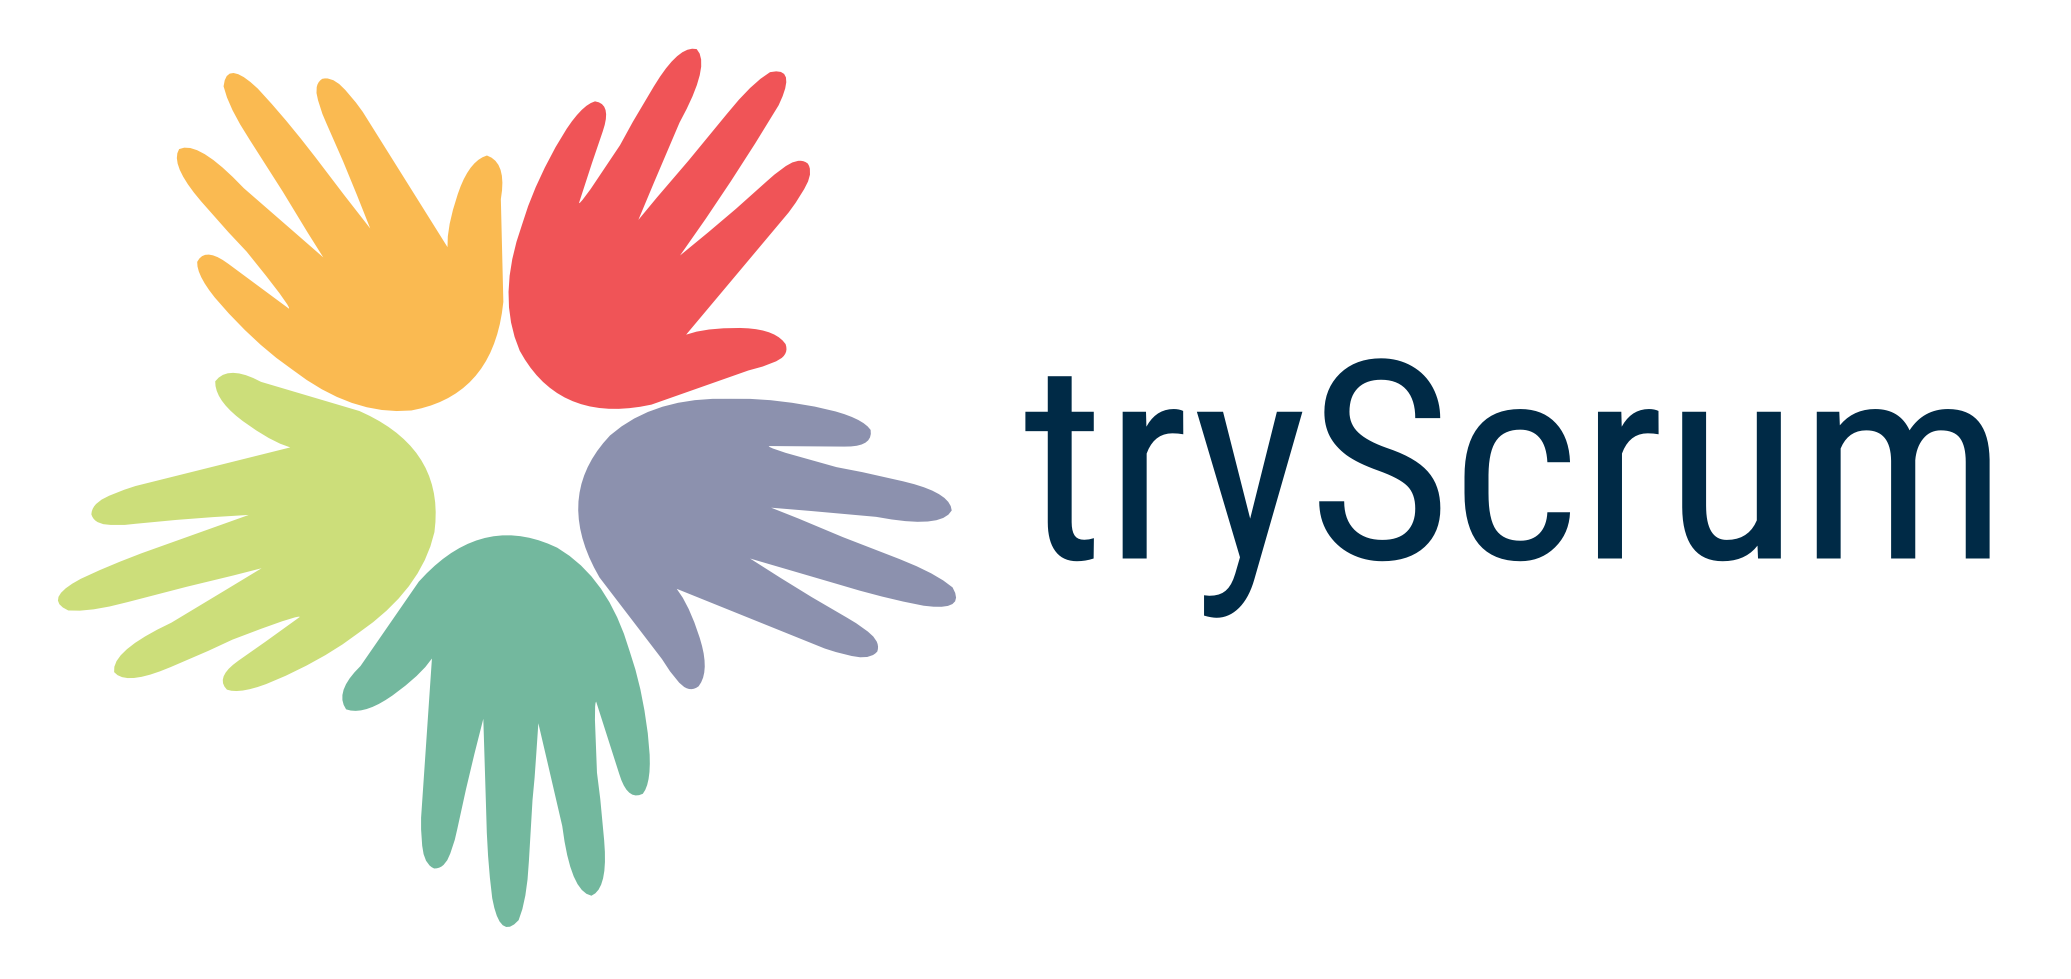 Try   Scrum (try_scrum)